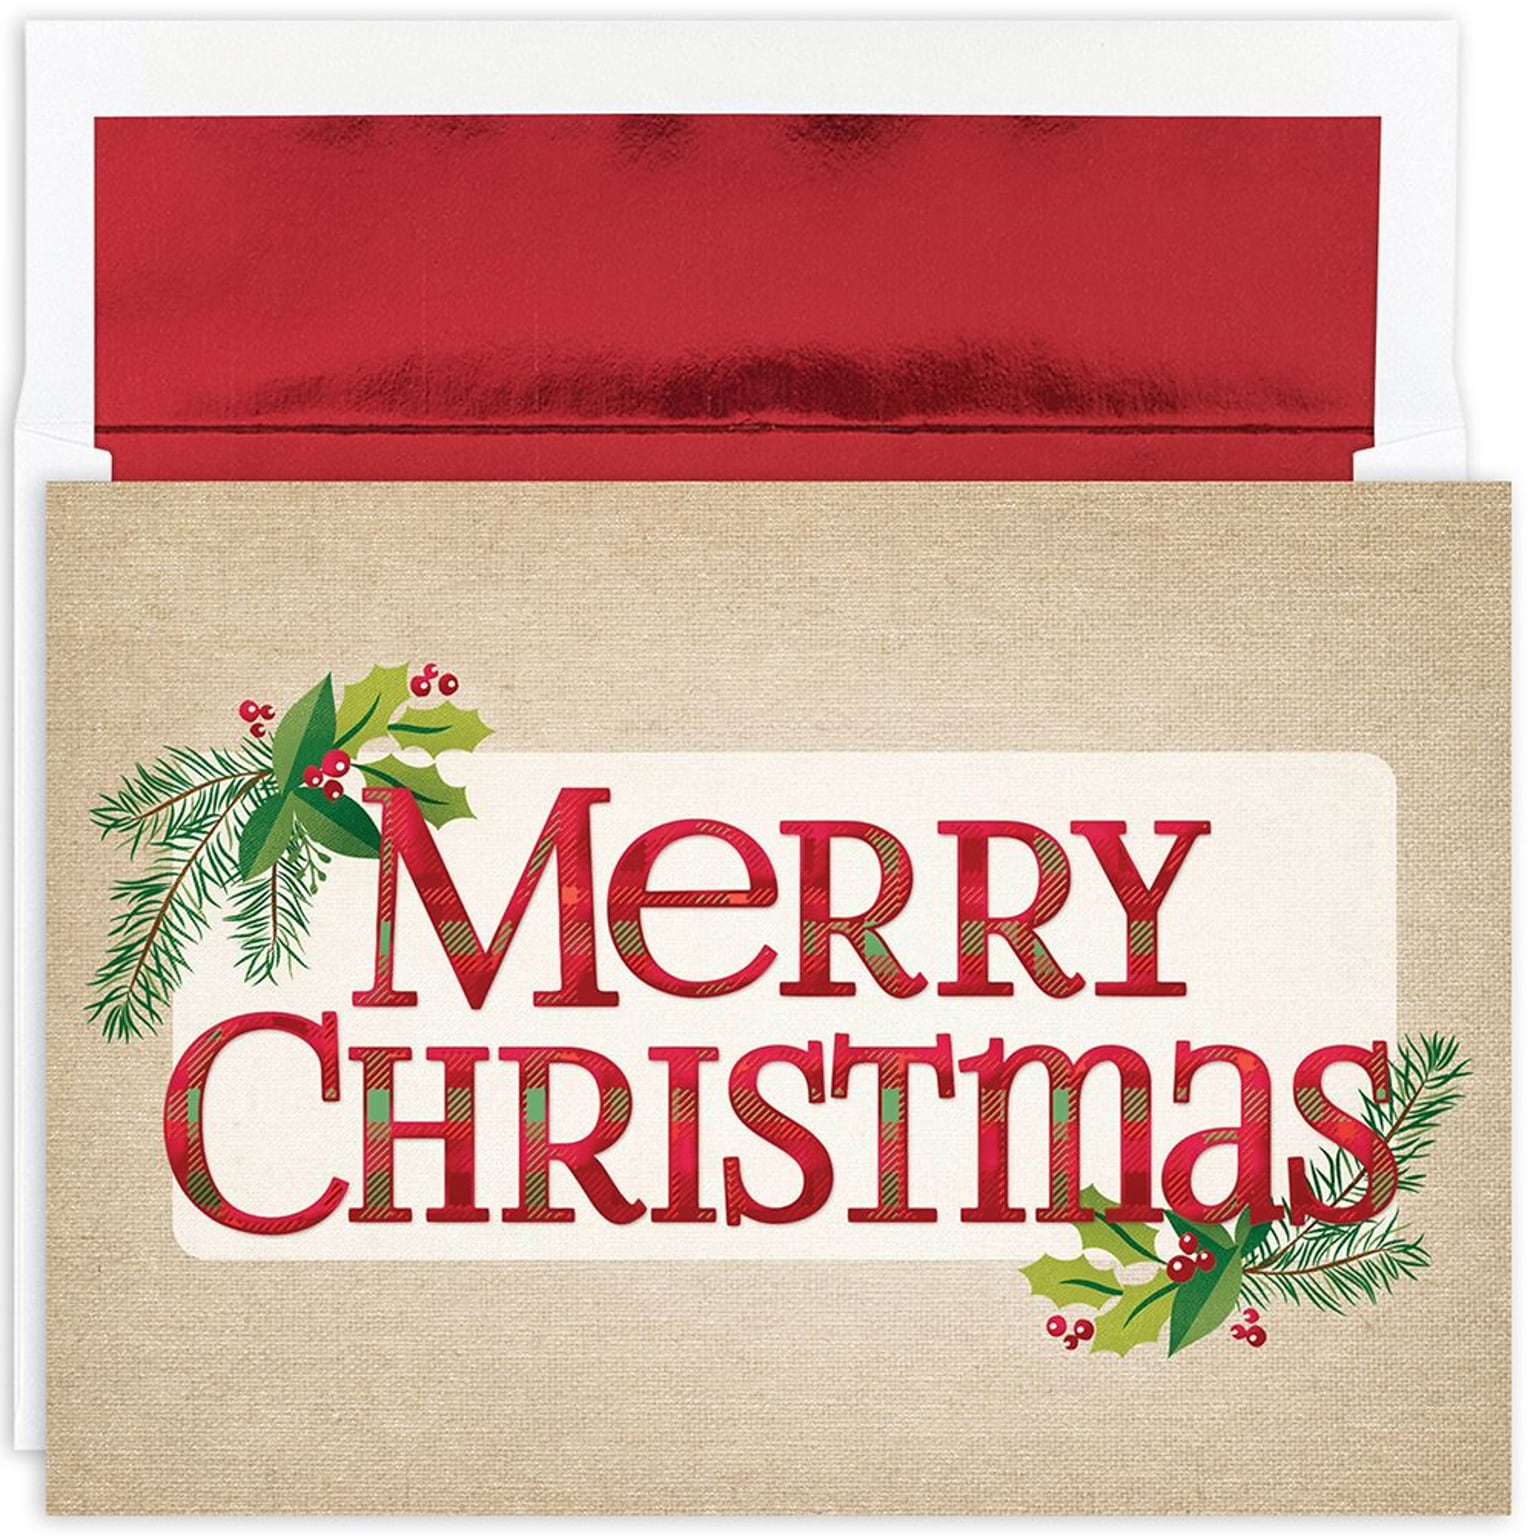 Great Papers!® Holiday Greeting Cards, Plaid Christmas Greetings, 7.875 x 5.625, 18 Cards/18 Foil-Lined Envelopes (902100)